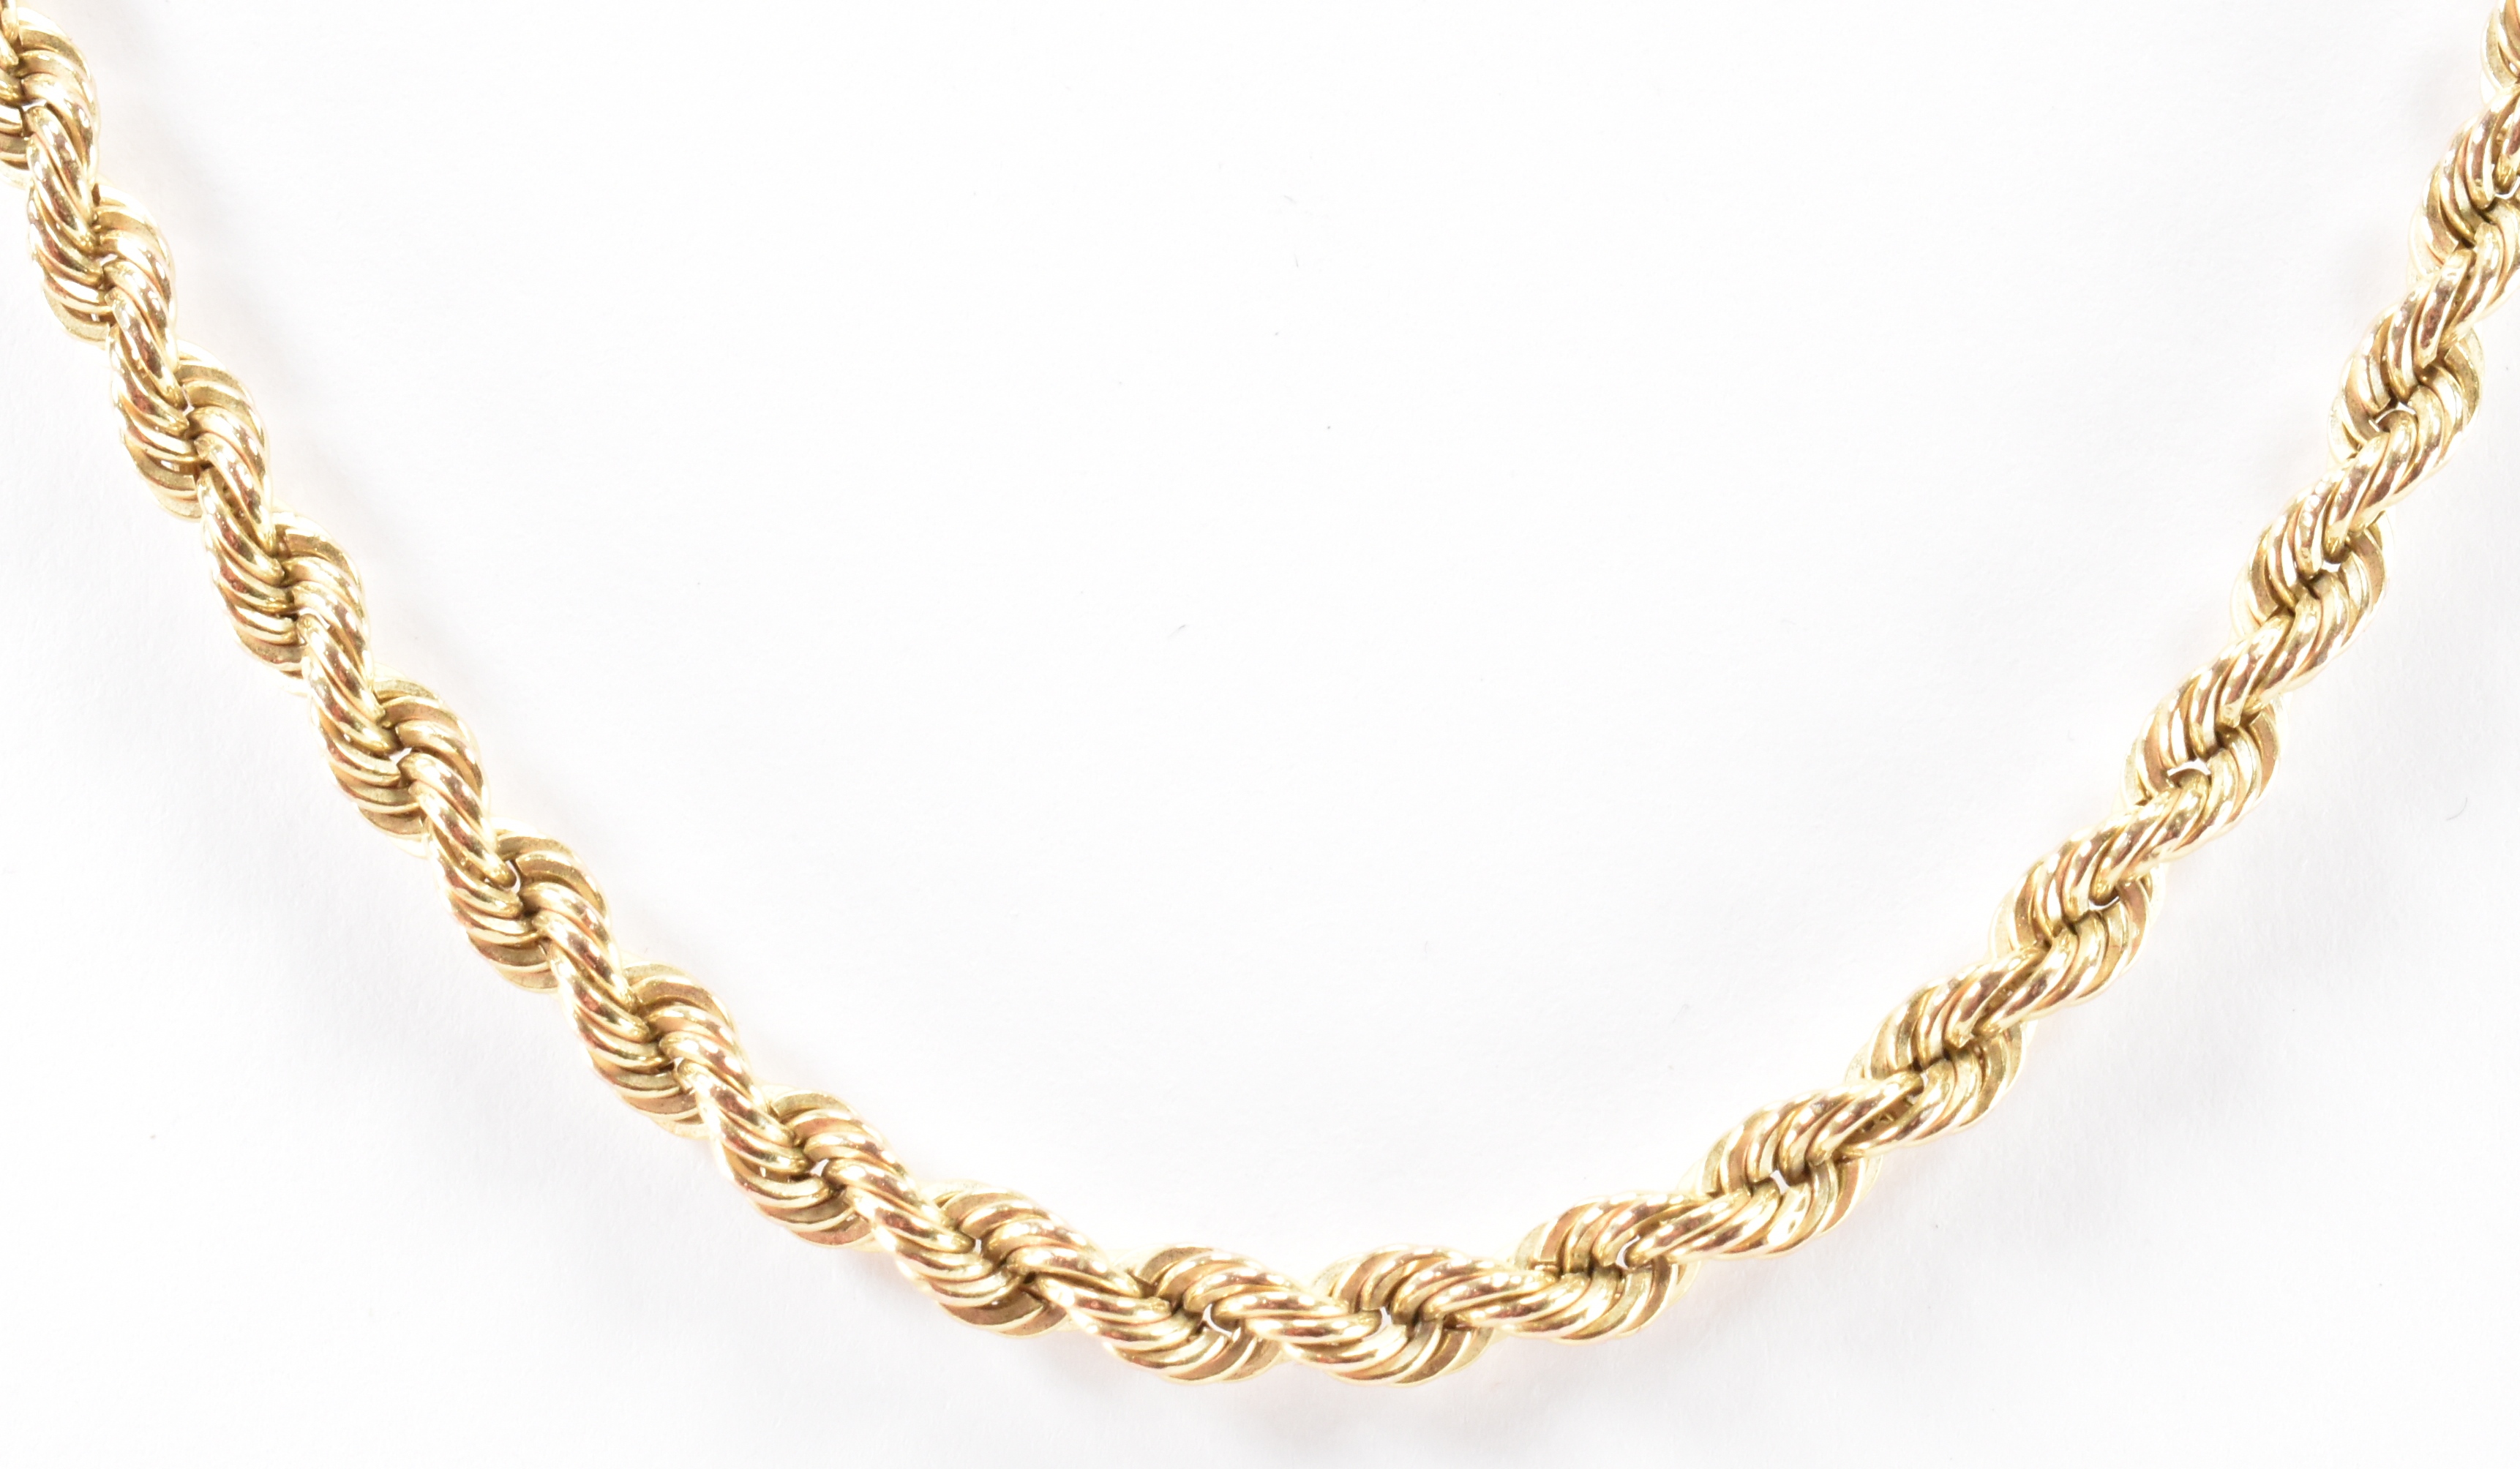 GOLD SINGPORE CHAIN NECKLACE - Image 2 of 4